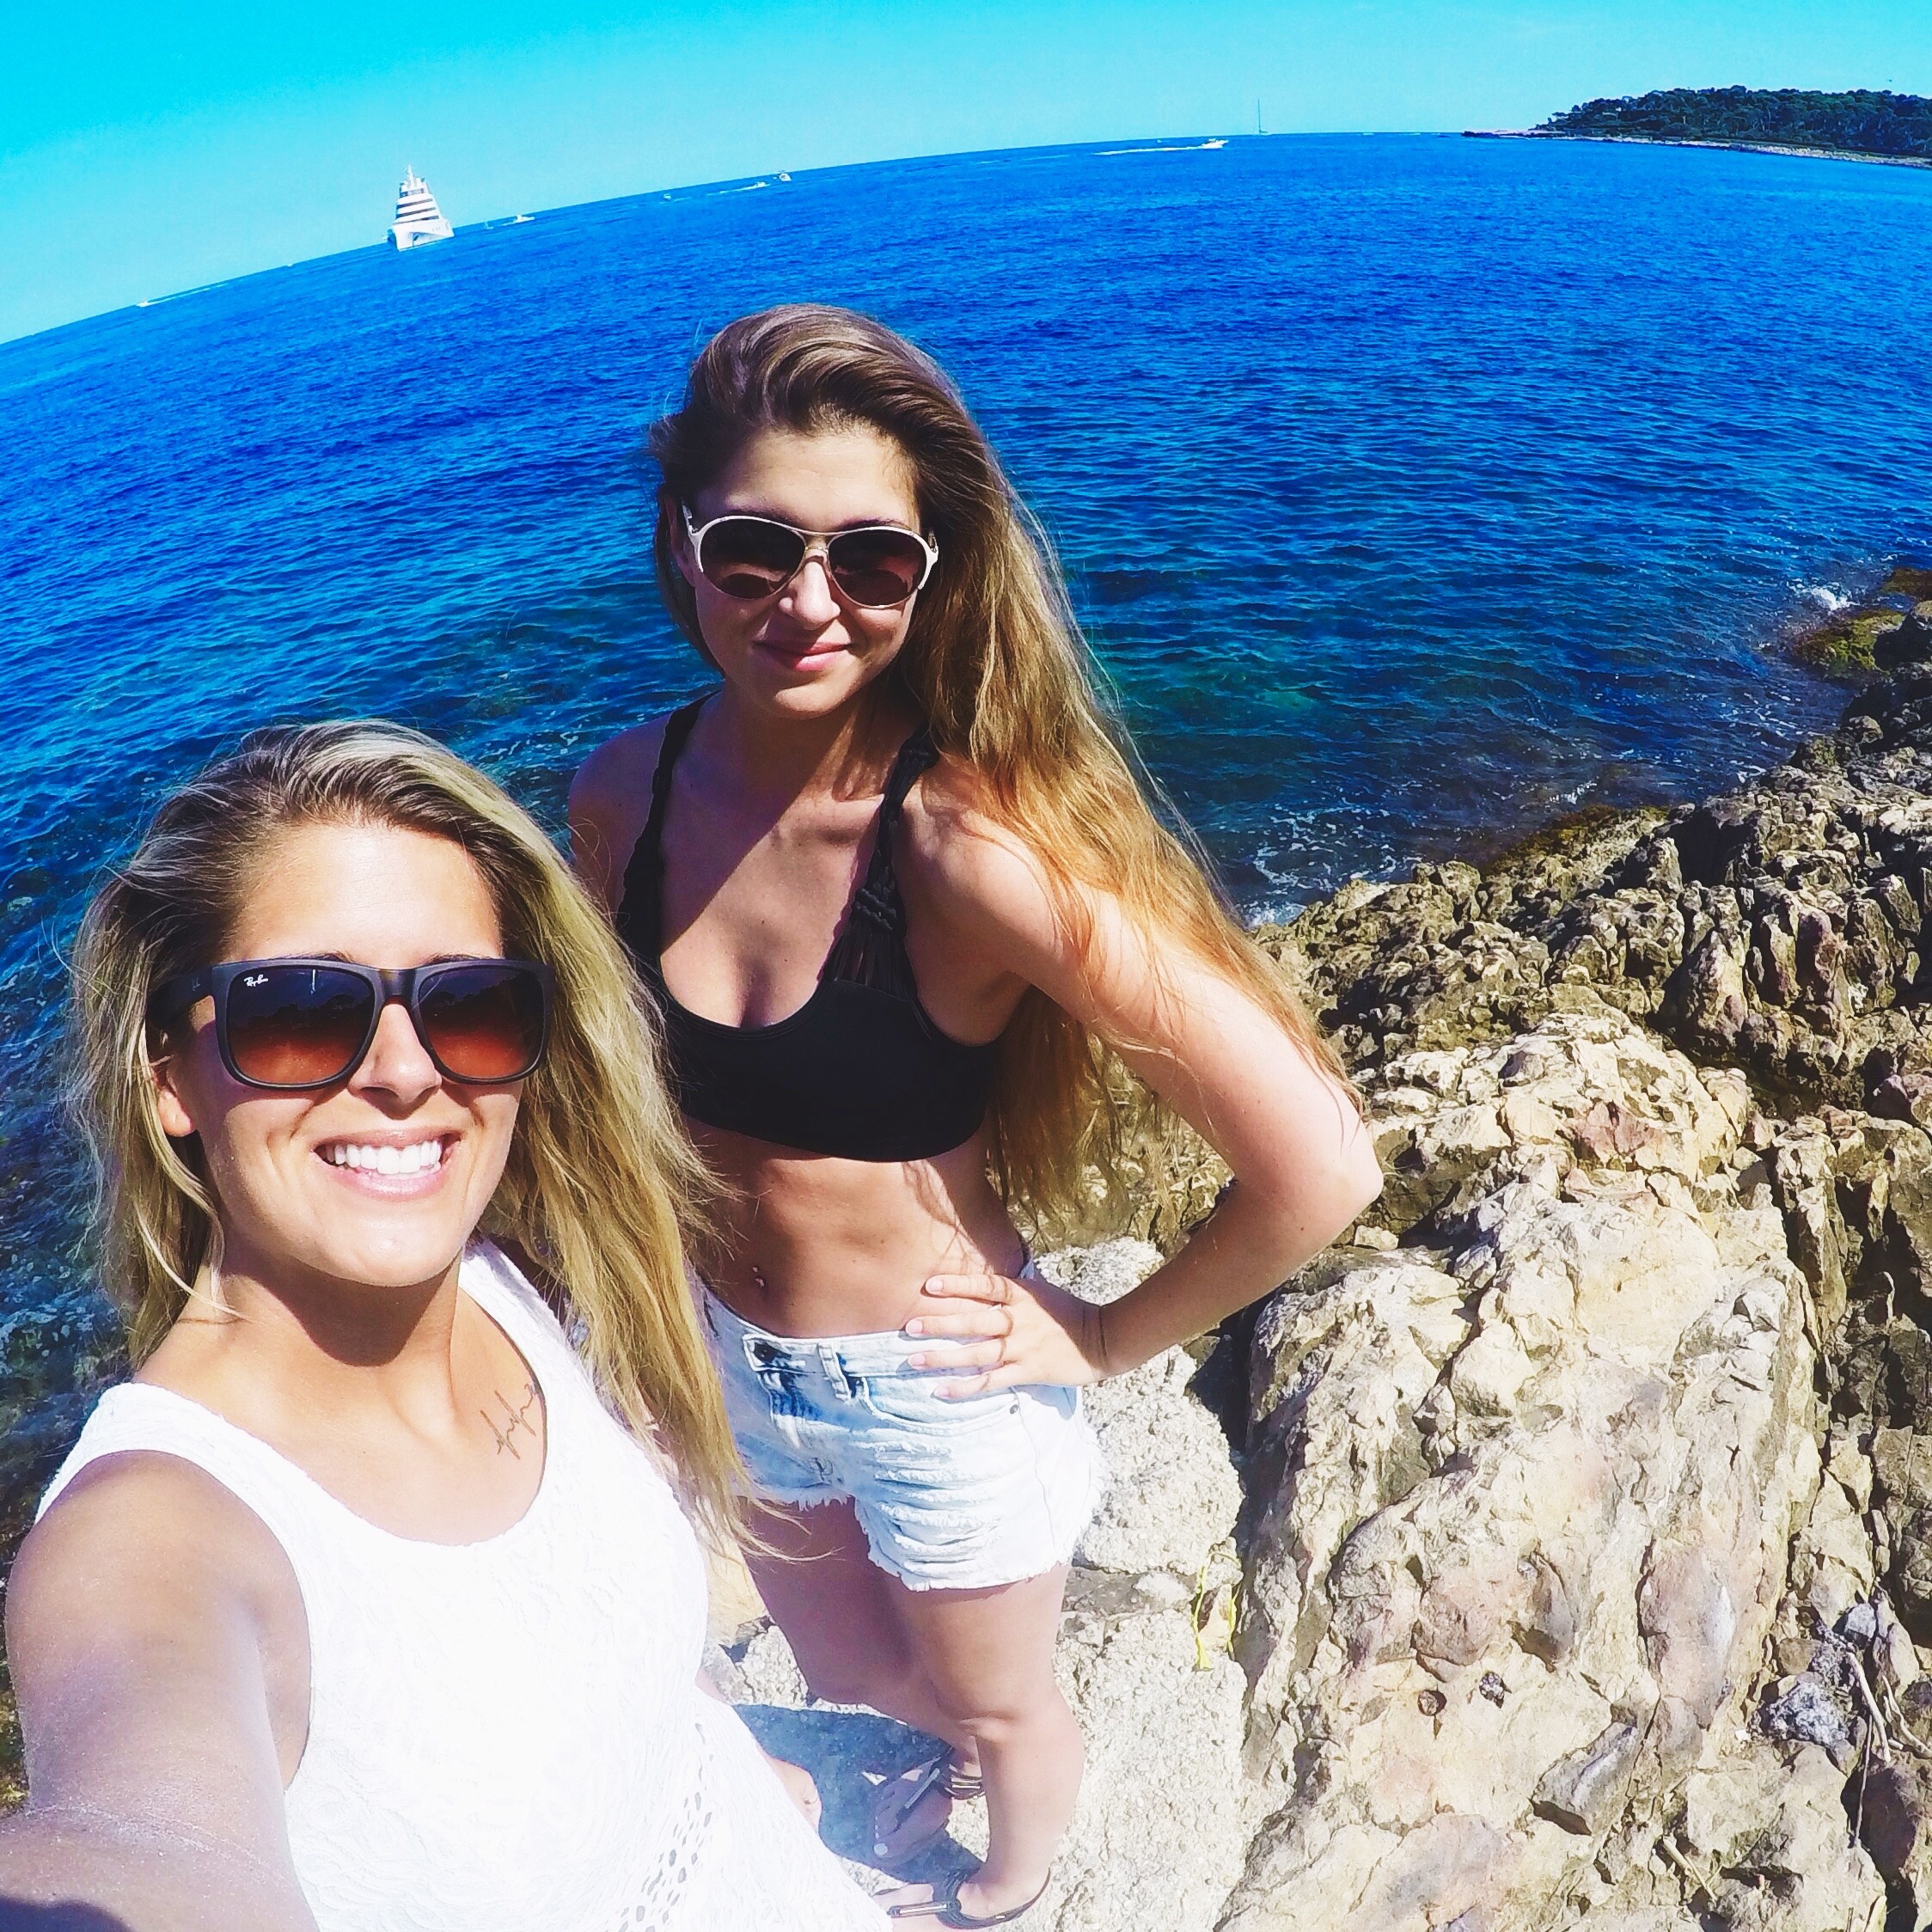 Sister selfie by the sea - Cannes - Côte d'Azur - South of France (French Riviera)